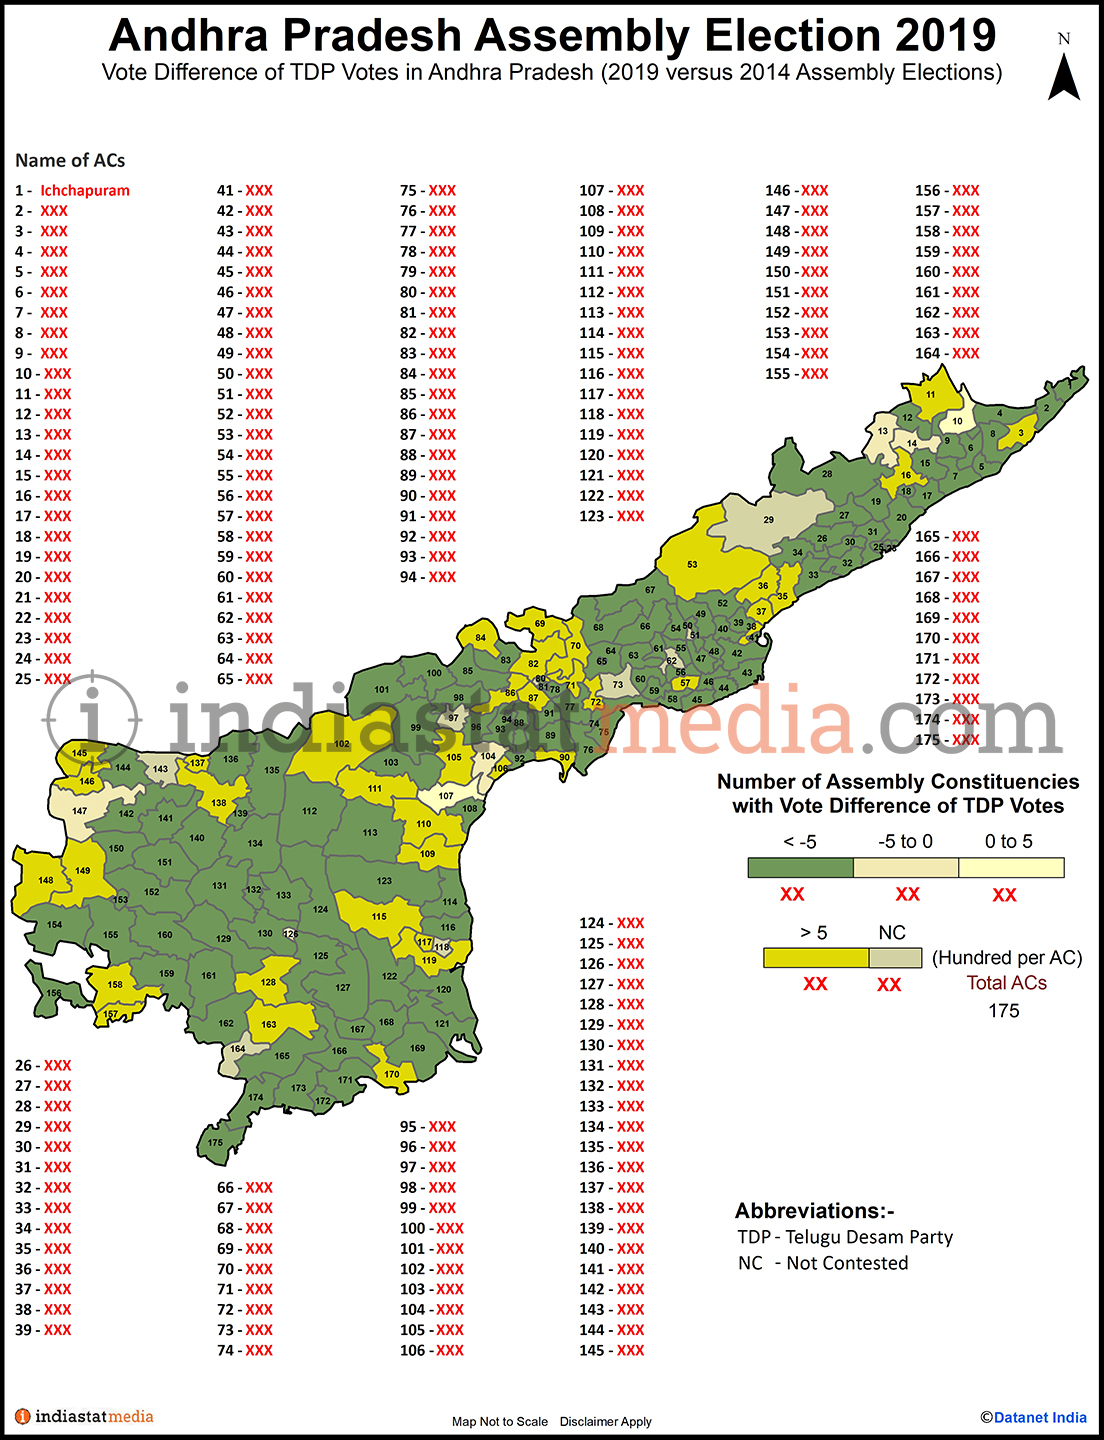 Assembly Constituencies with Vote Difference of TDP Votes in Andhra Pradesh (Assembly Elections - 2014 & 2019)